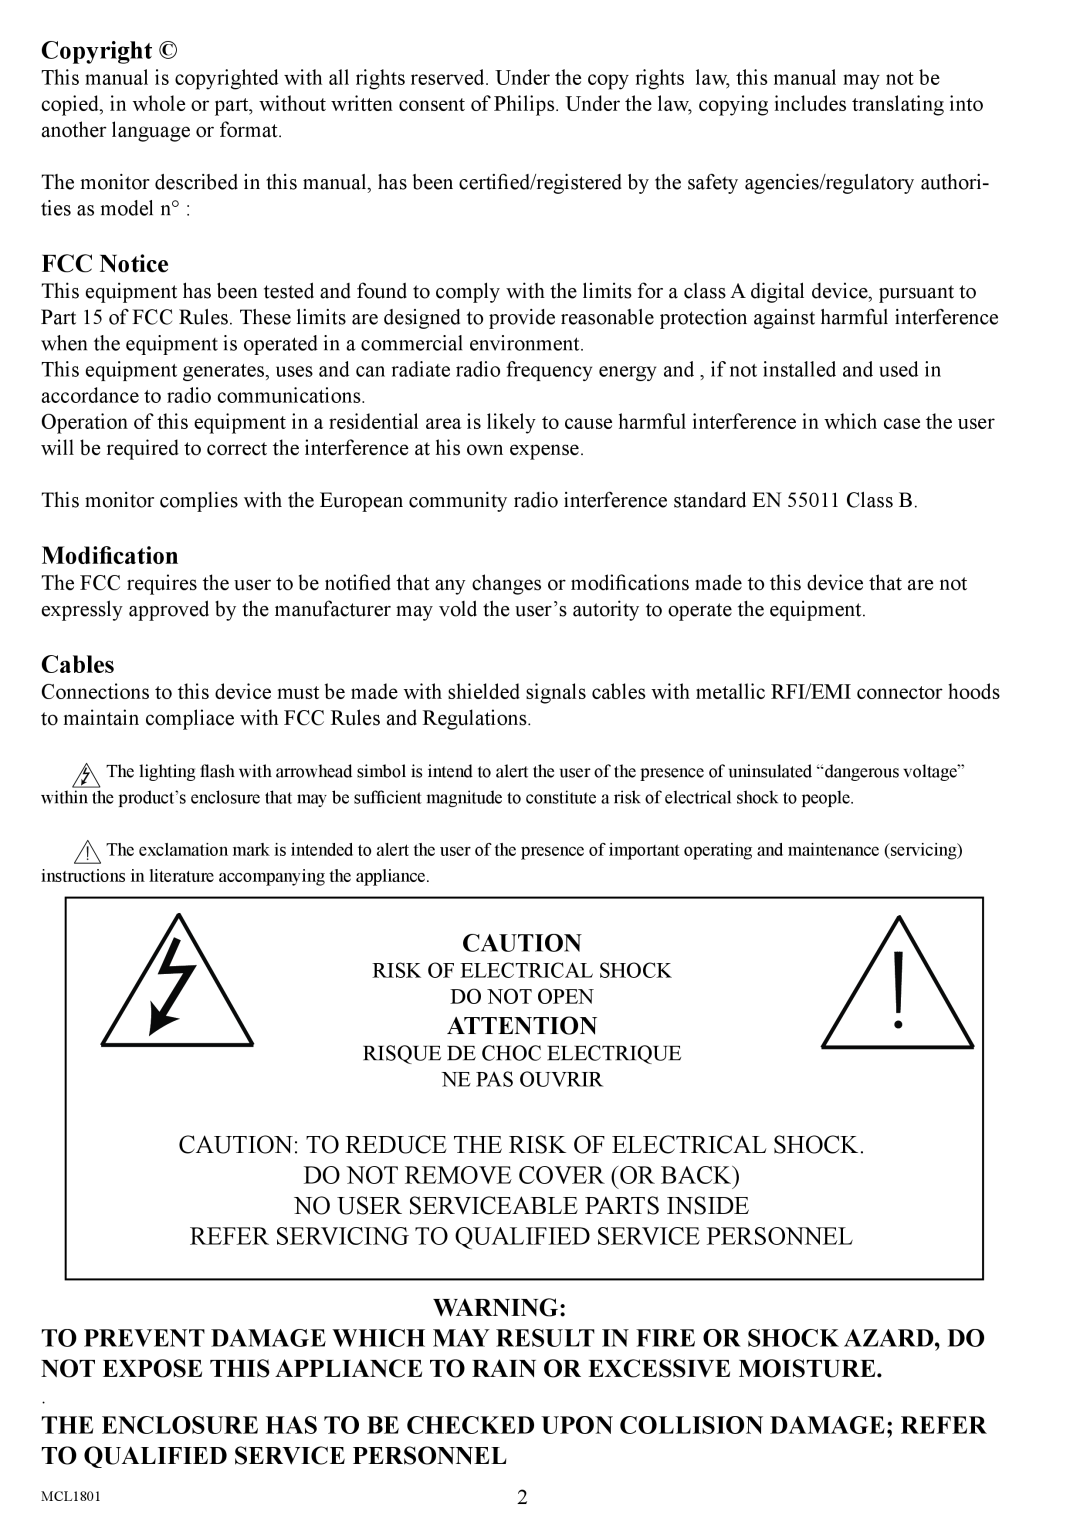 Philips MCL1801 user manual Copyright, FCC Notice, Modiﬁcation, Cables, Caution: To Reduce The Risk Of Electrical Shock 